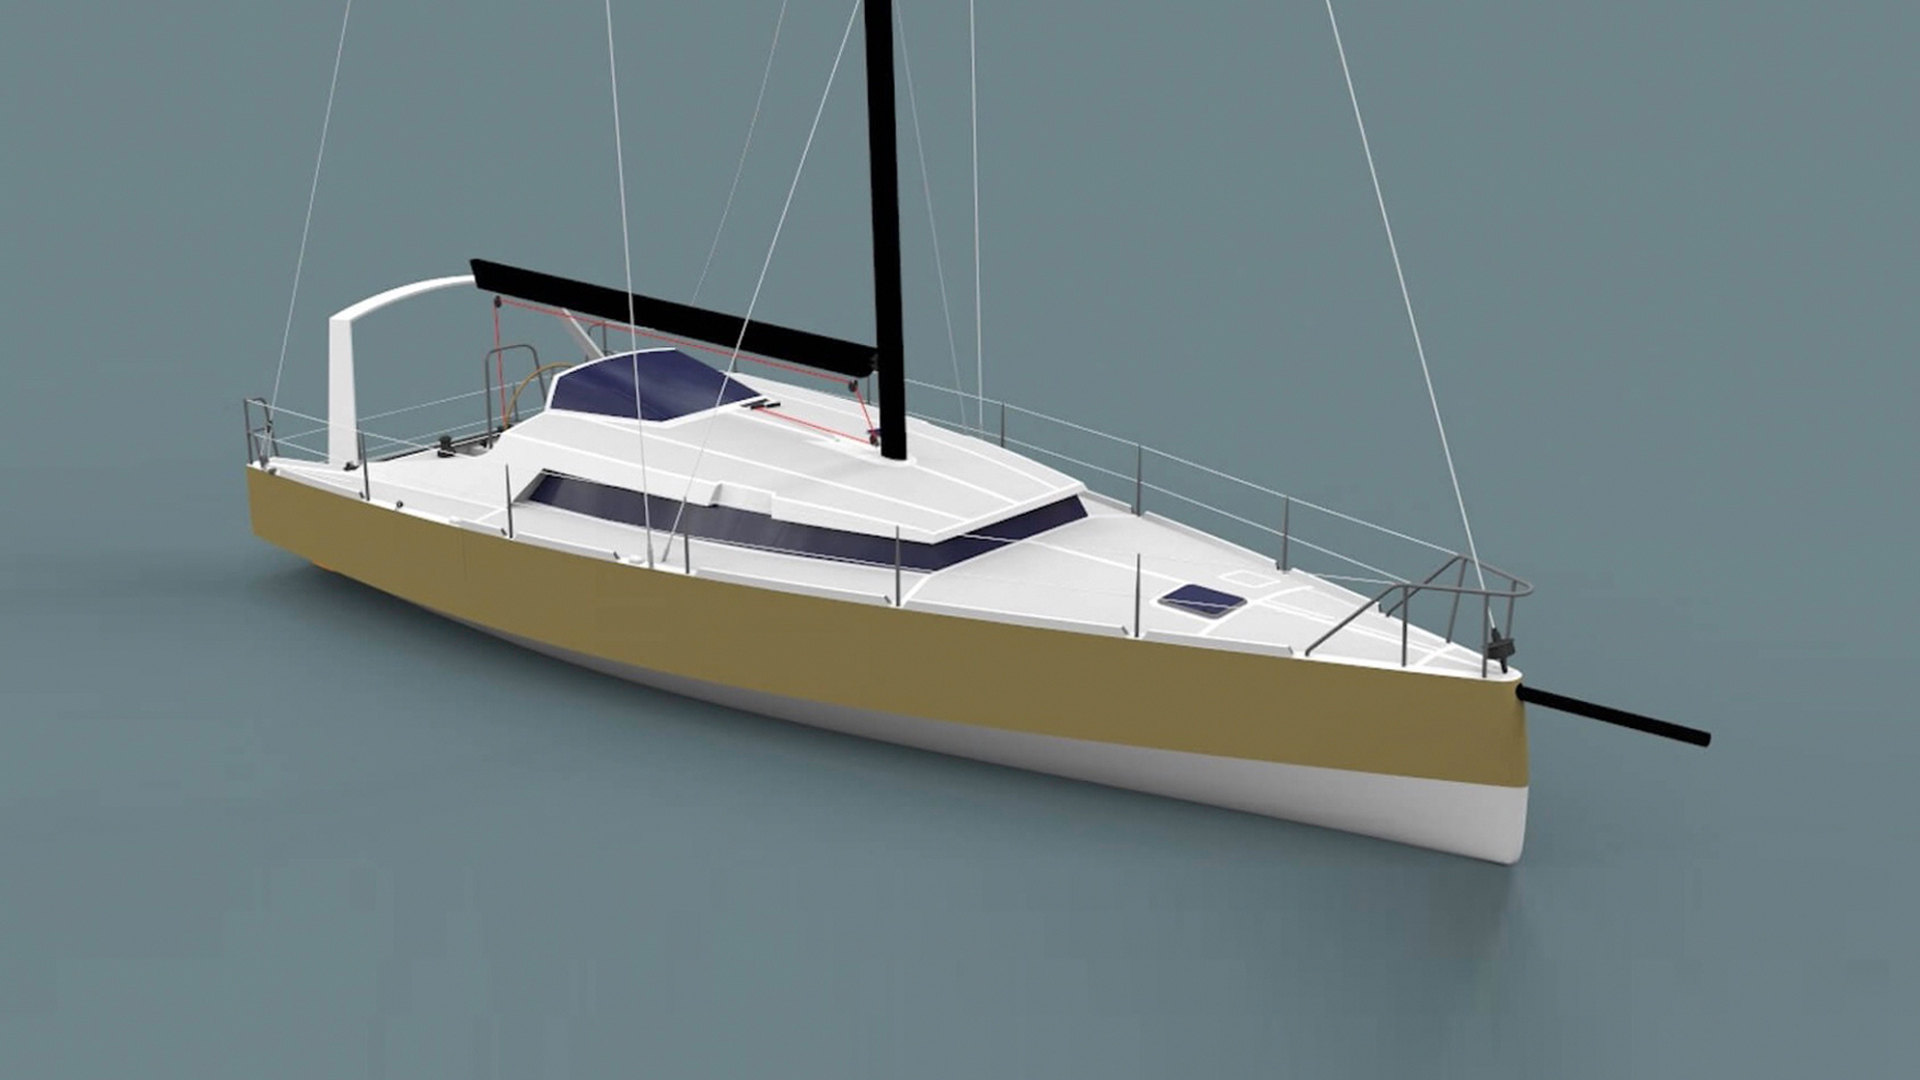 Owen Clarke Design are the designers of this custom 40 foot blue water lifting keel cruising yacht which is currently in-build at the  Alwoplast yard in Chile.